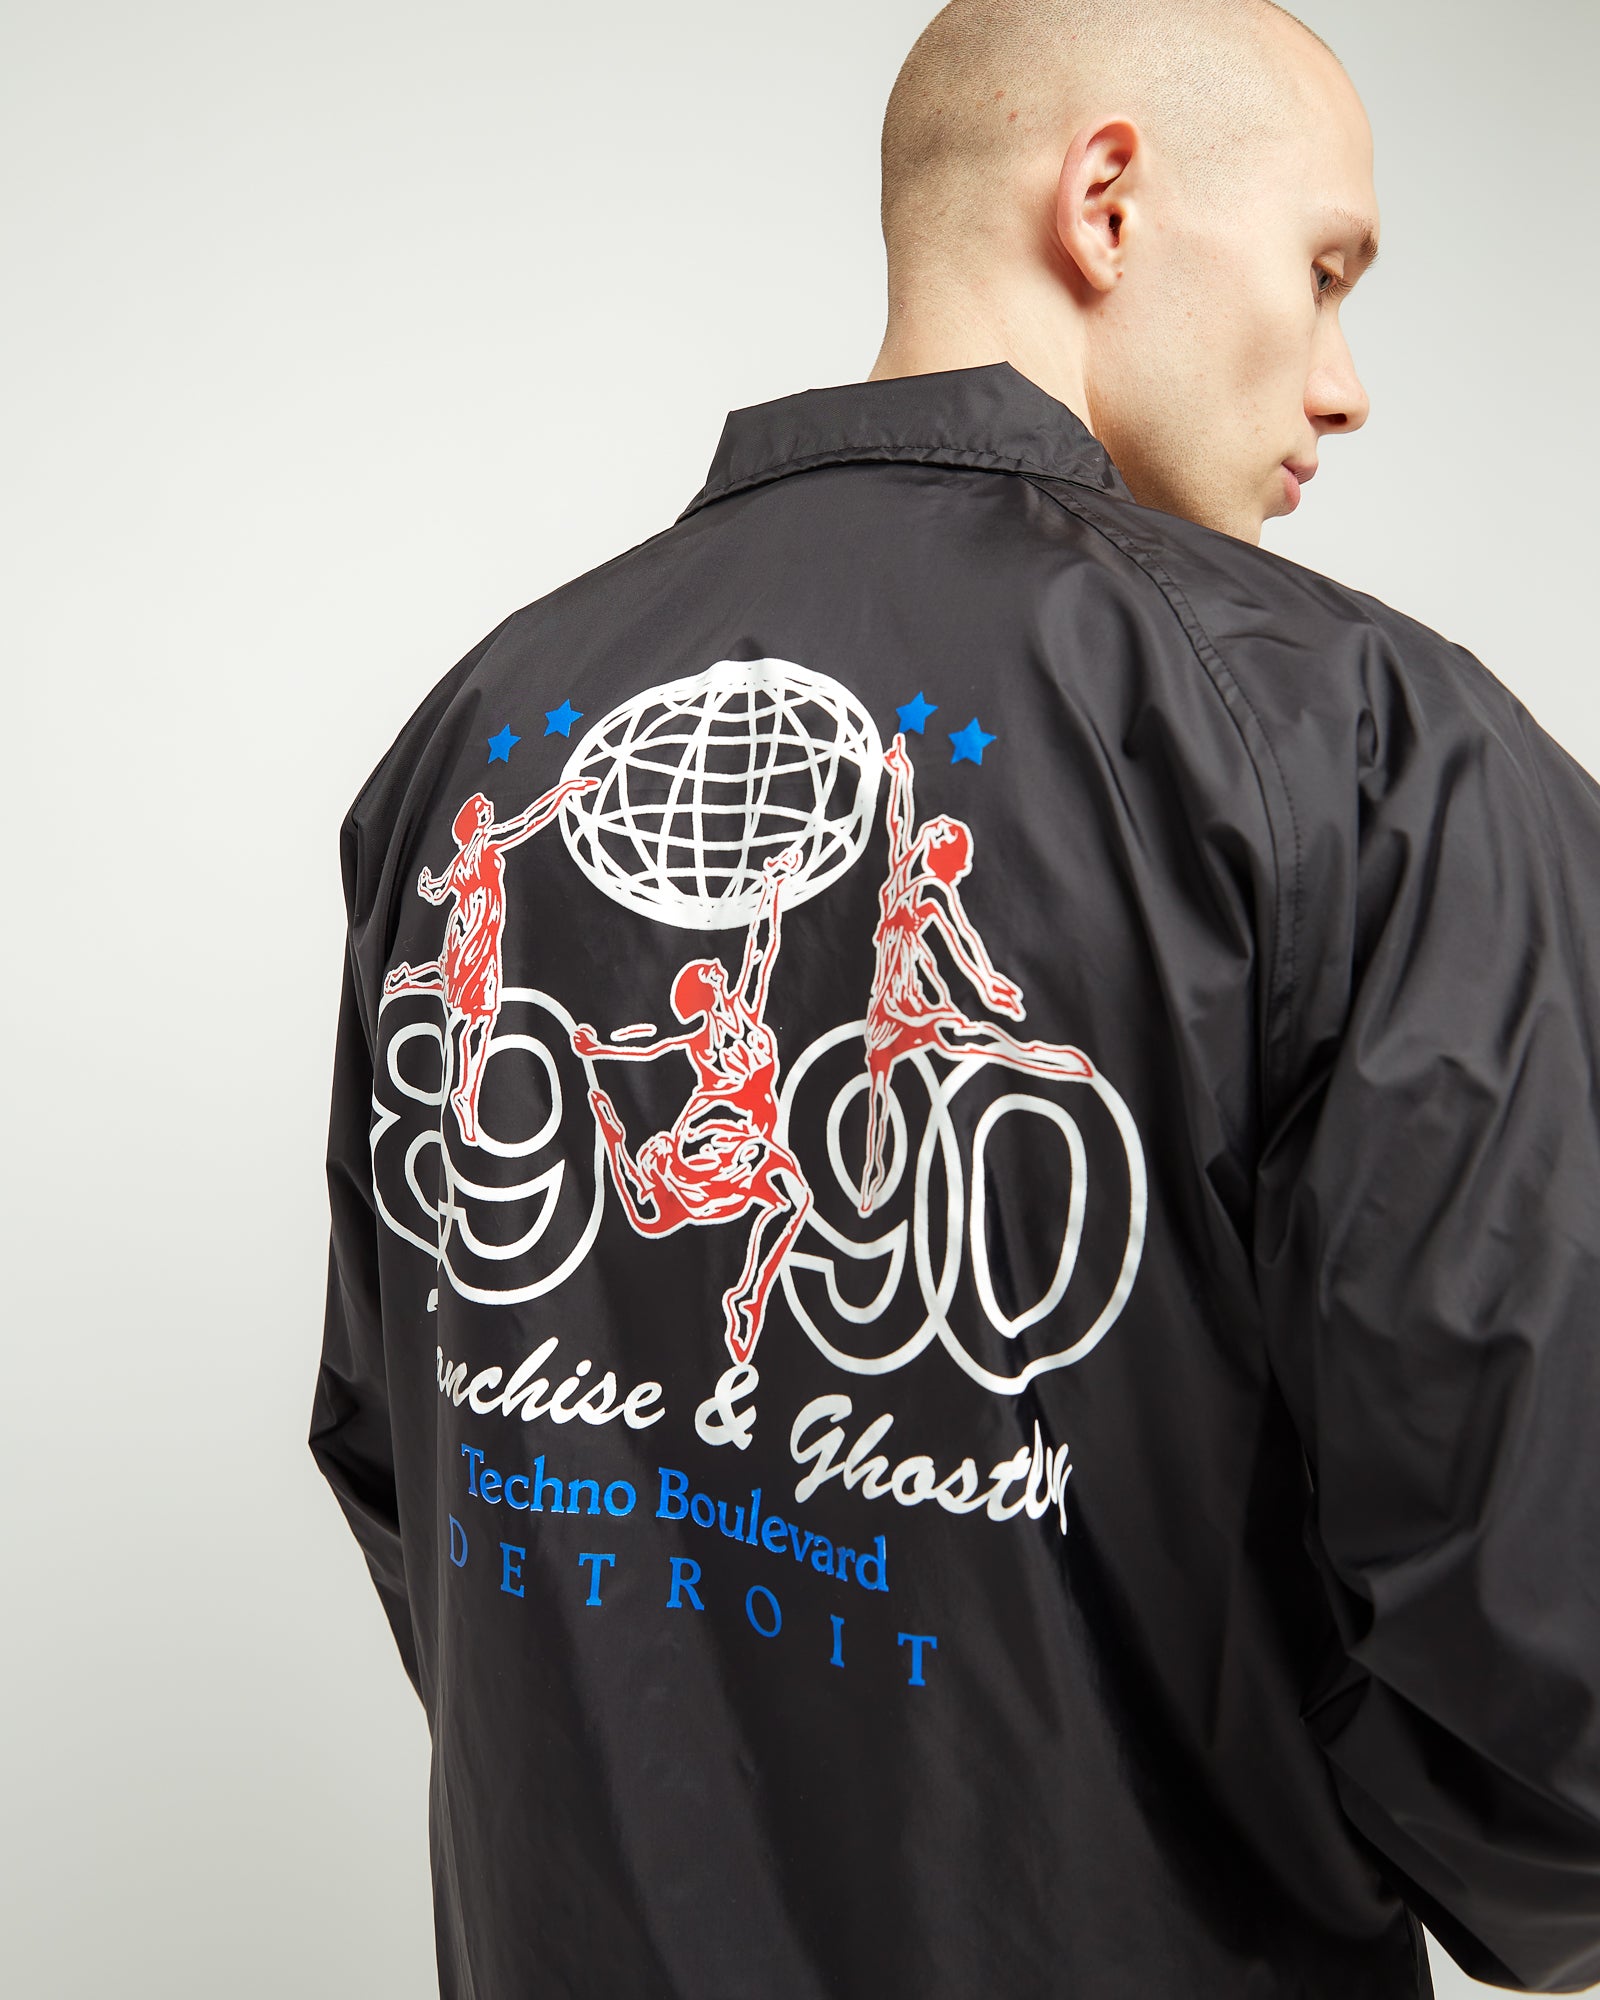 Ghostly x Franchise Coach Jacket in Black